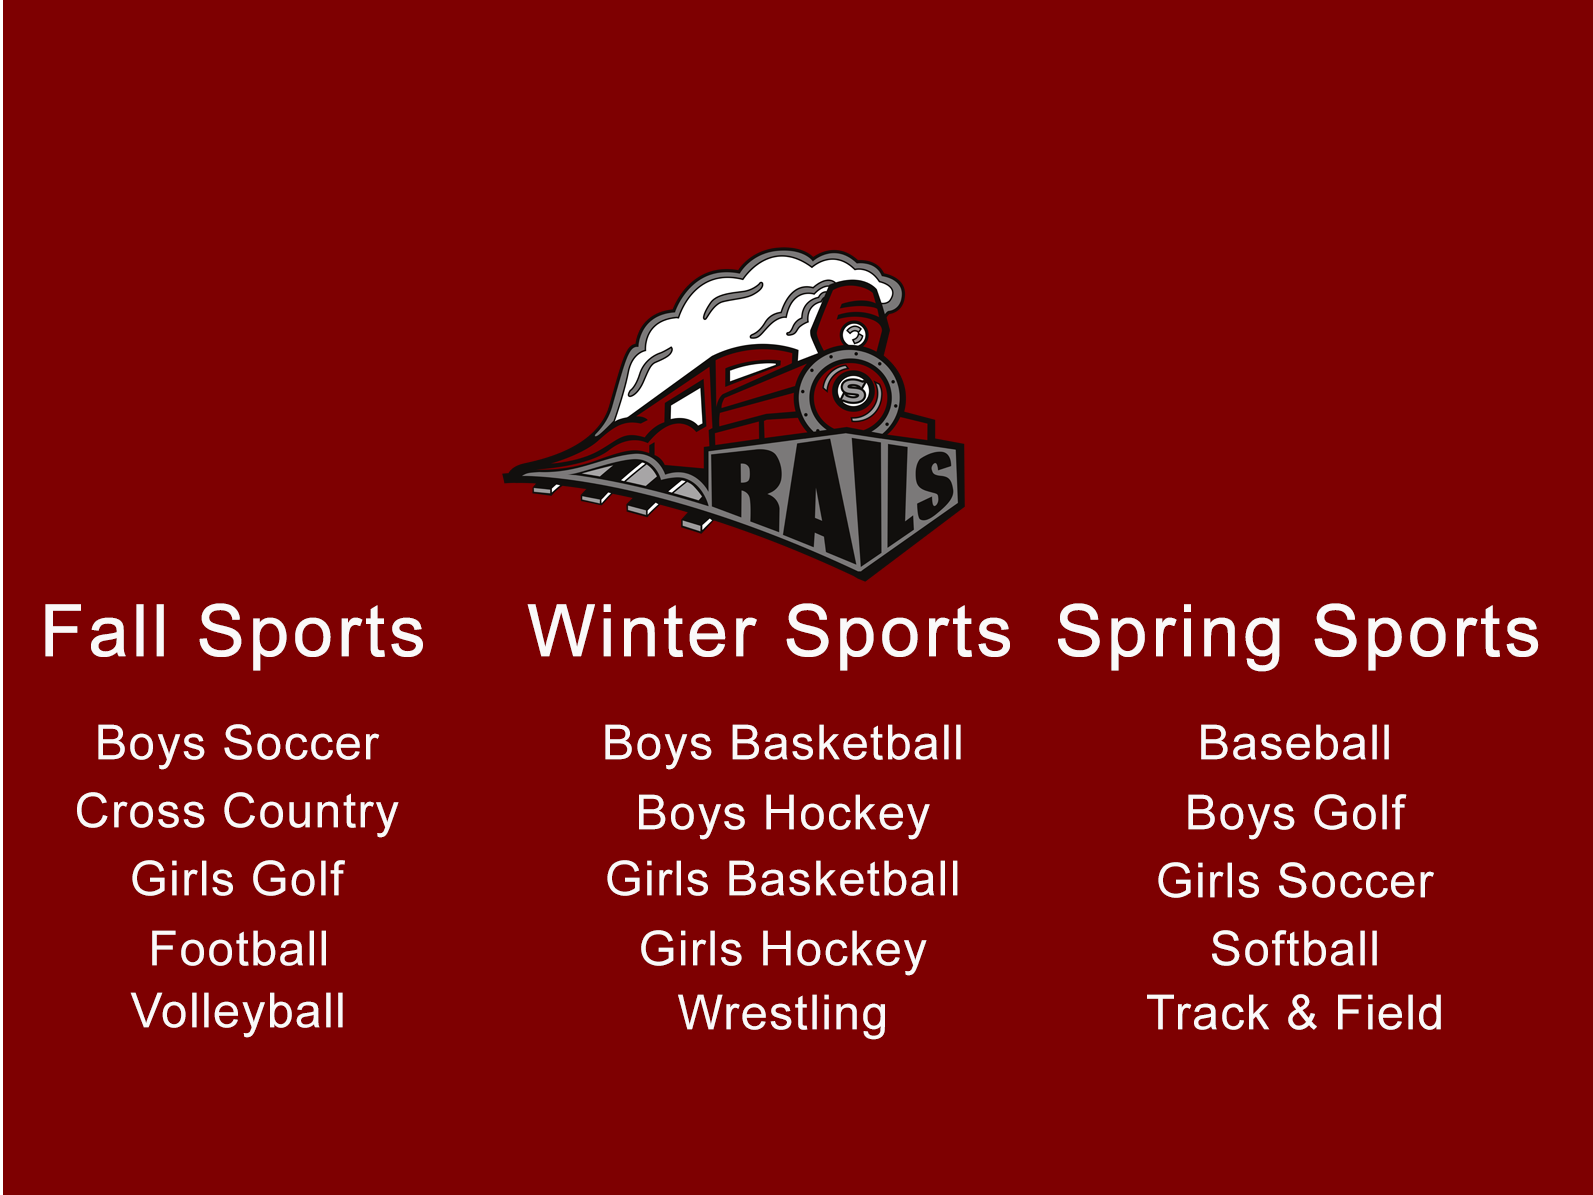 Sports offered at Spooner High School